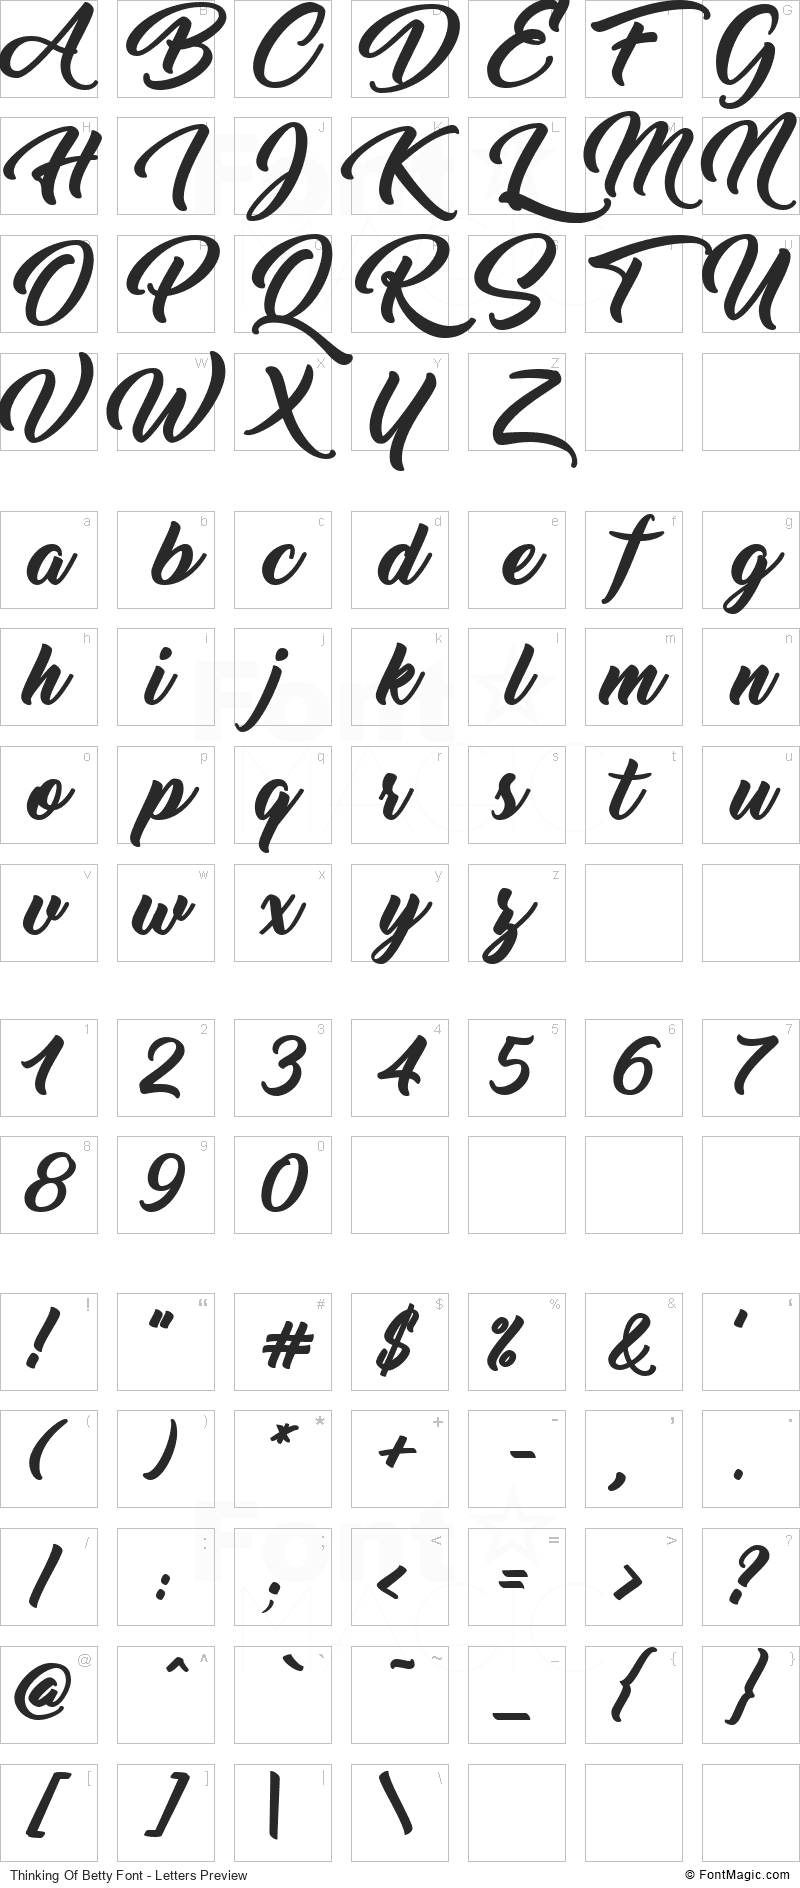 Thinking Of Betty Font - All Latters Preview Chart